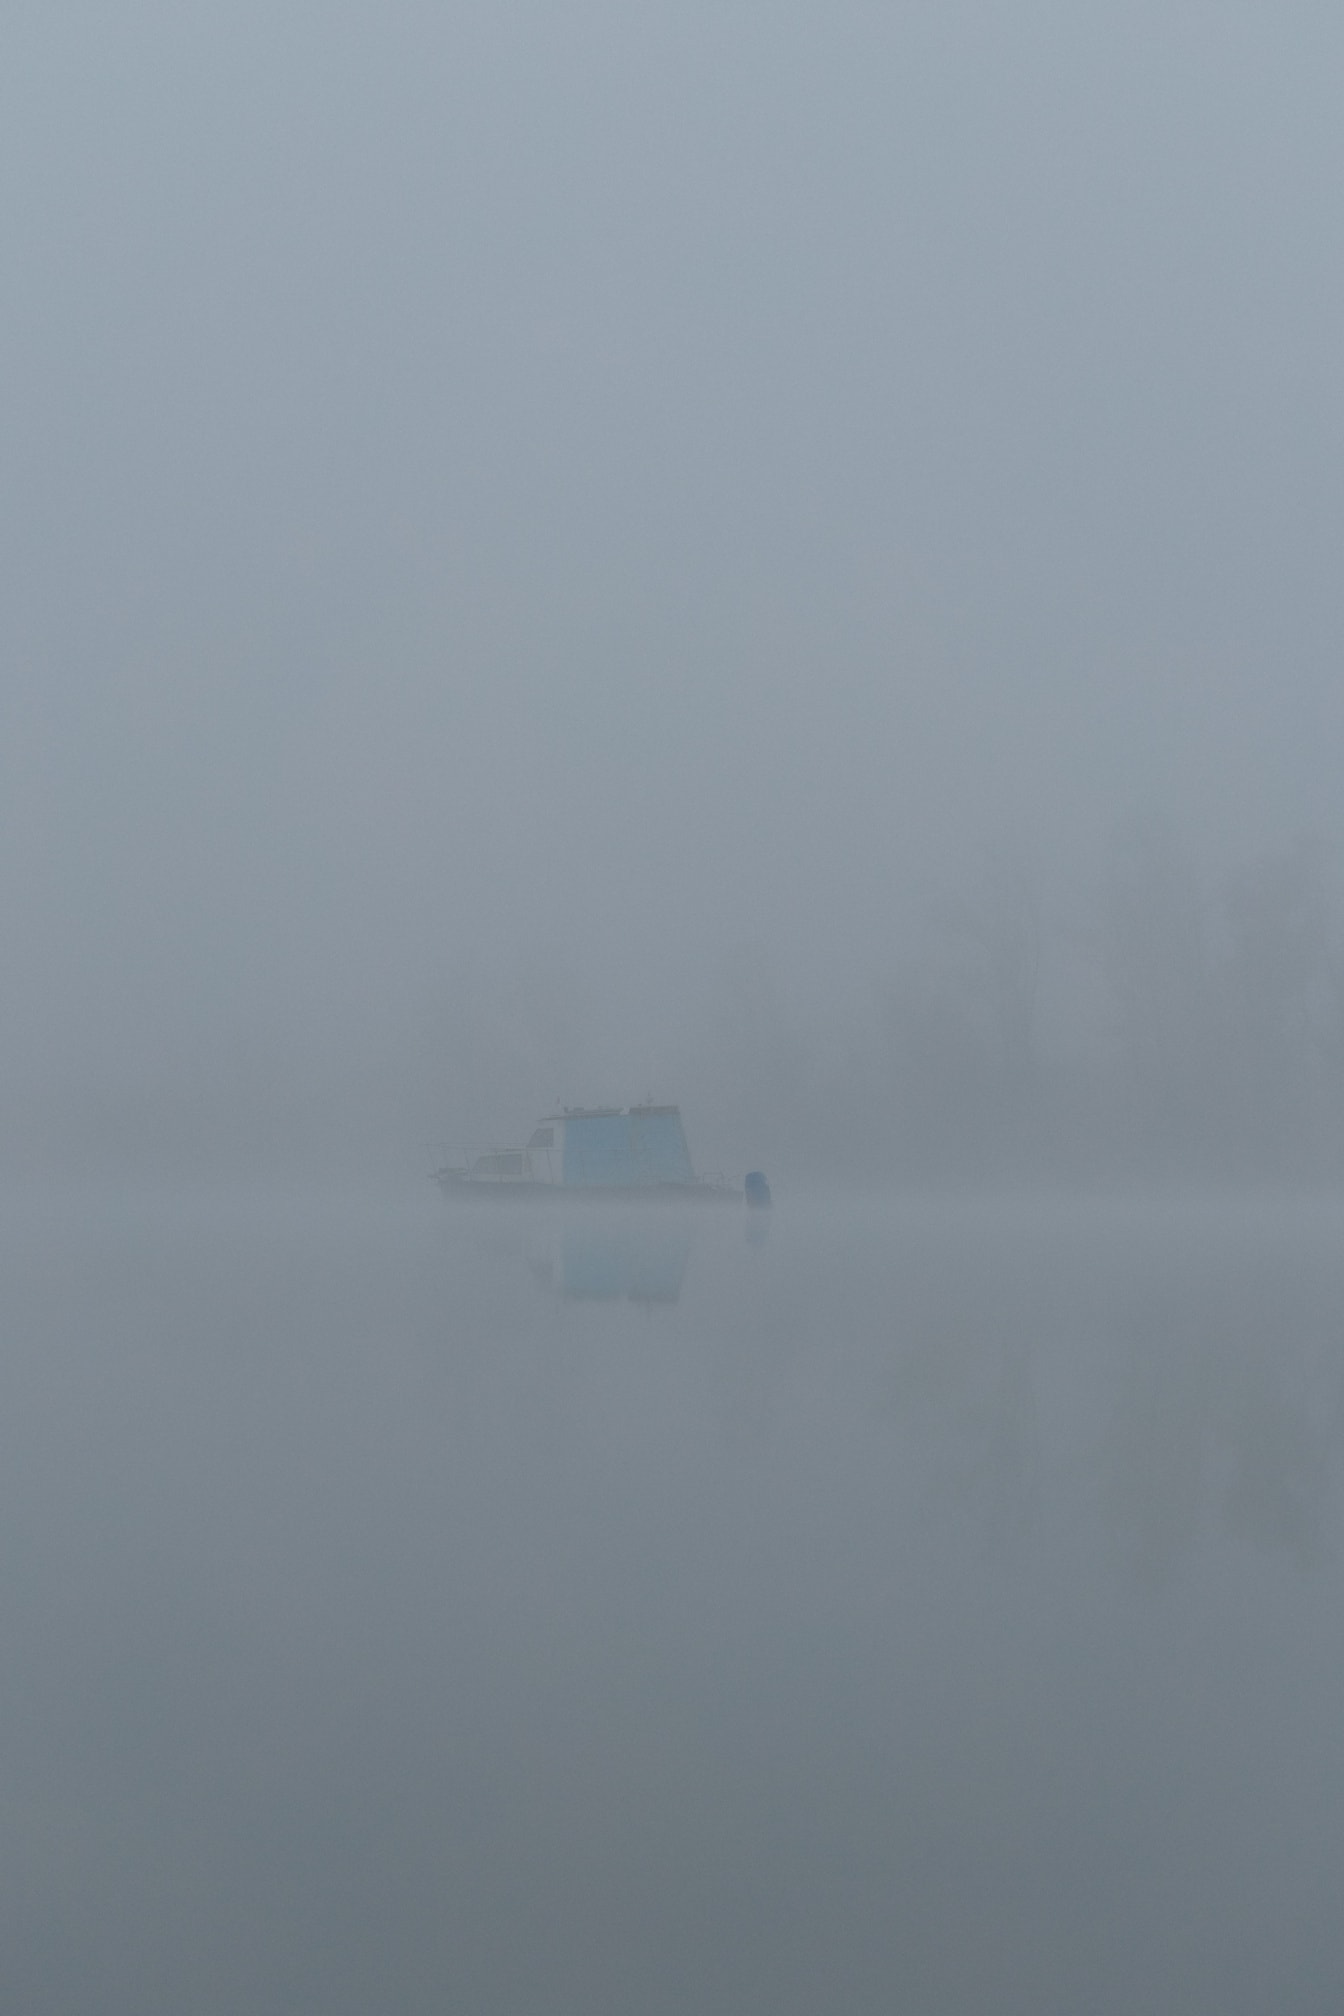 Boat in distance on lake in the dense fog